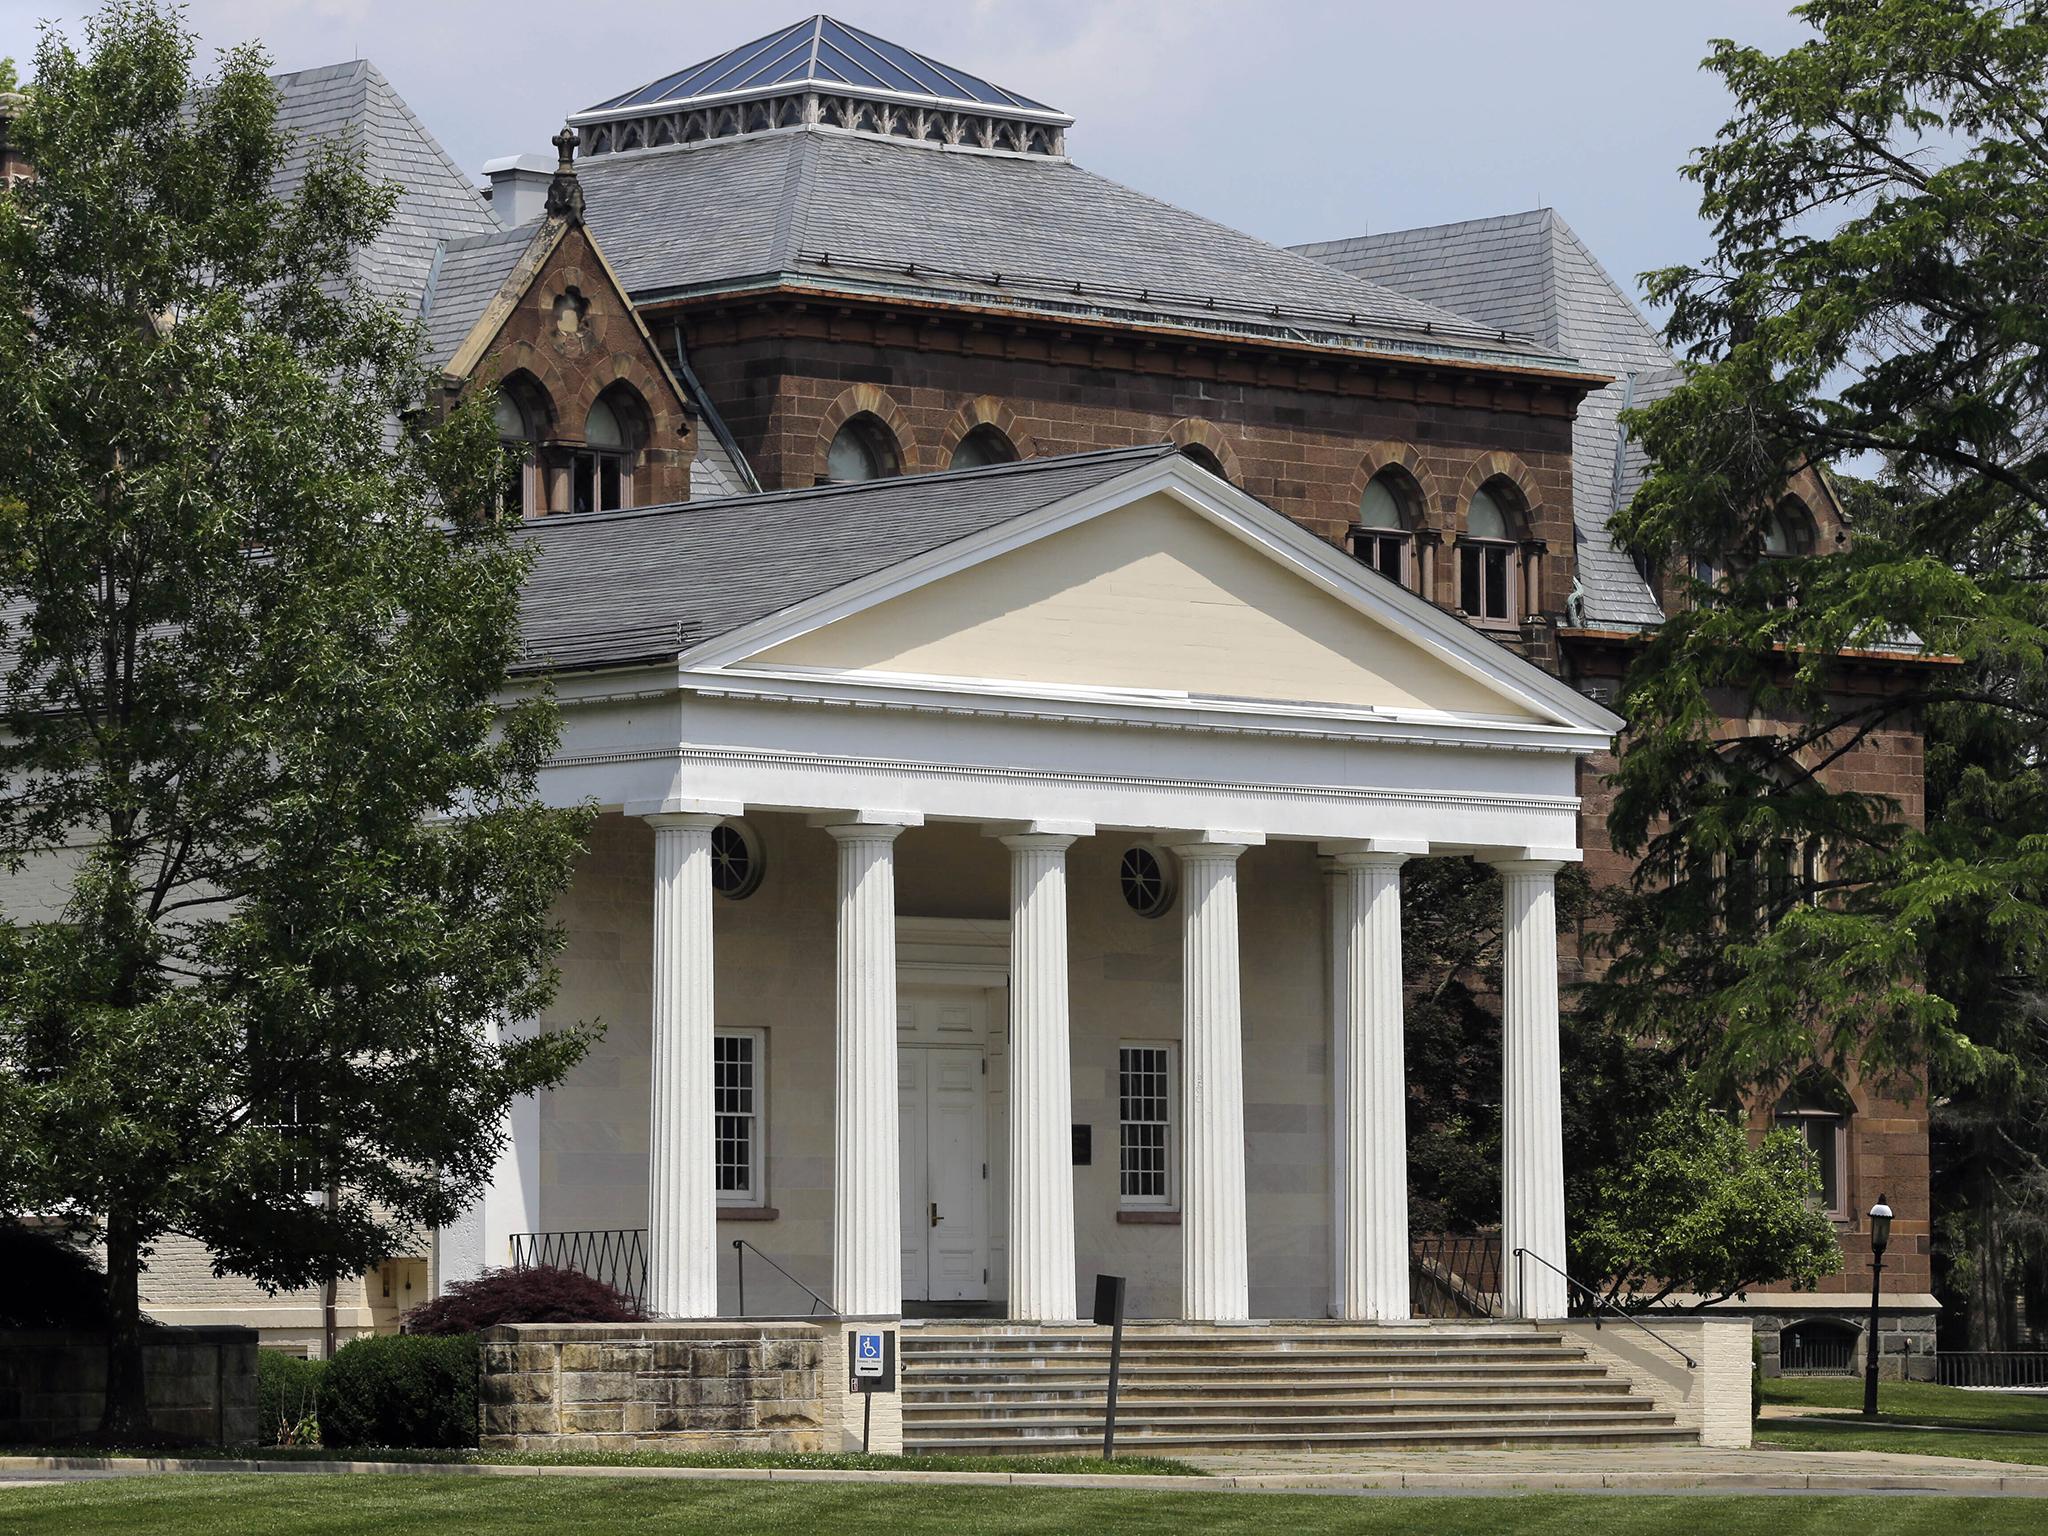 Founded in 1812, the seminary benefited from ties to slavery